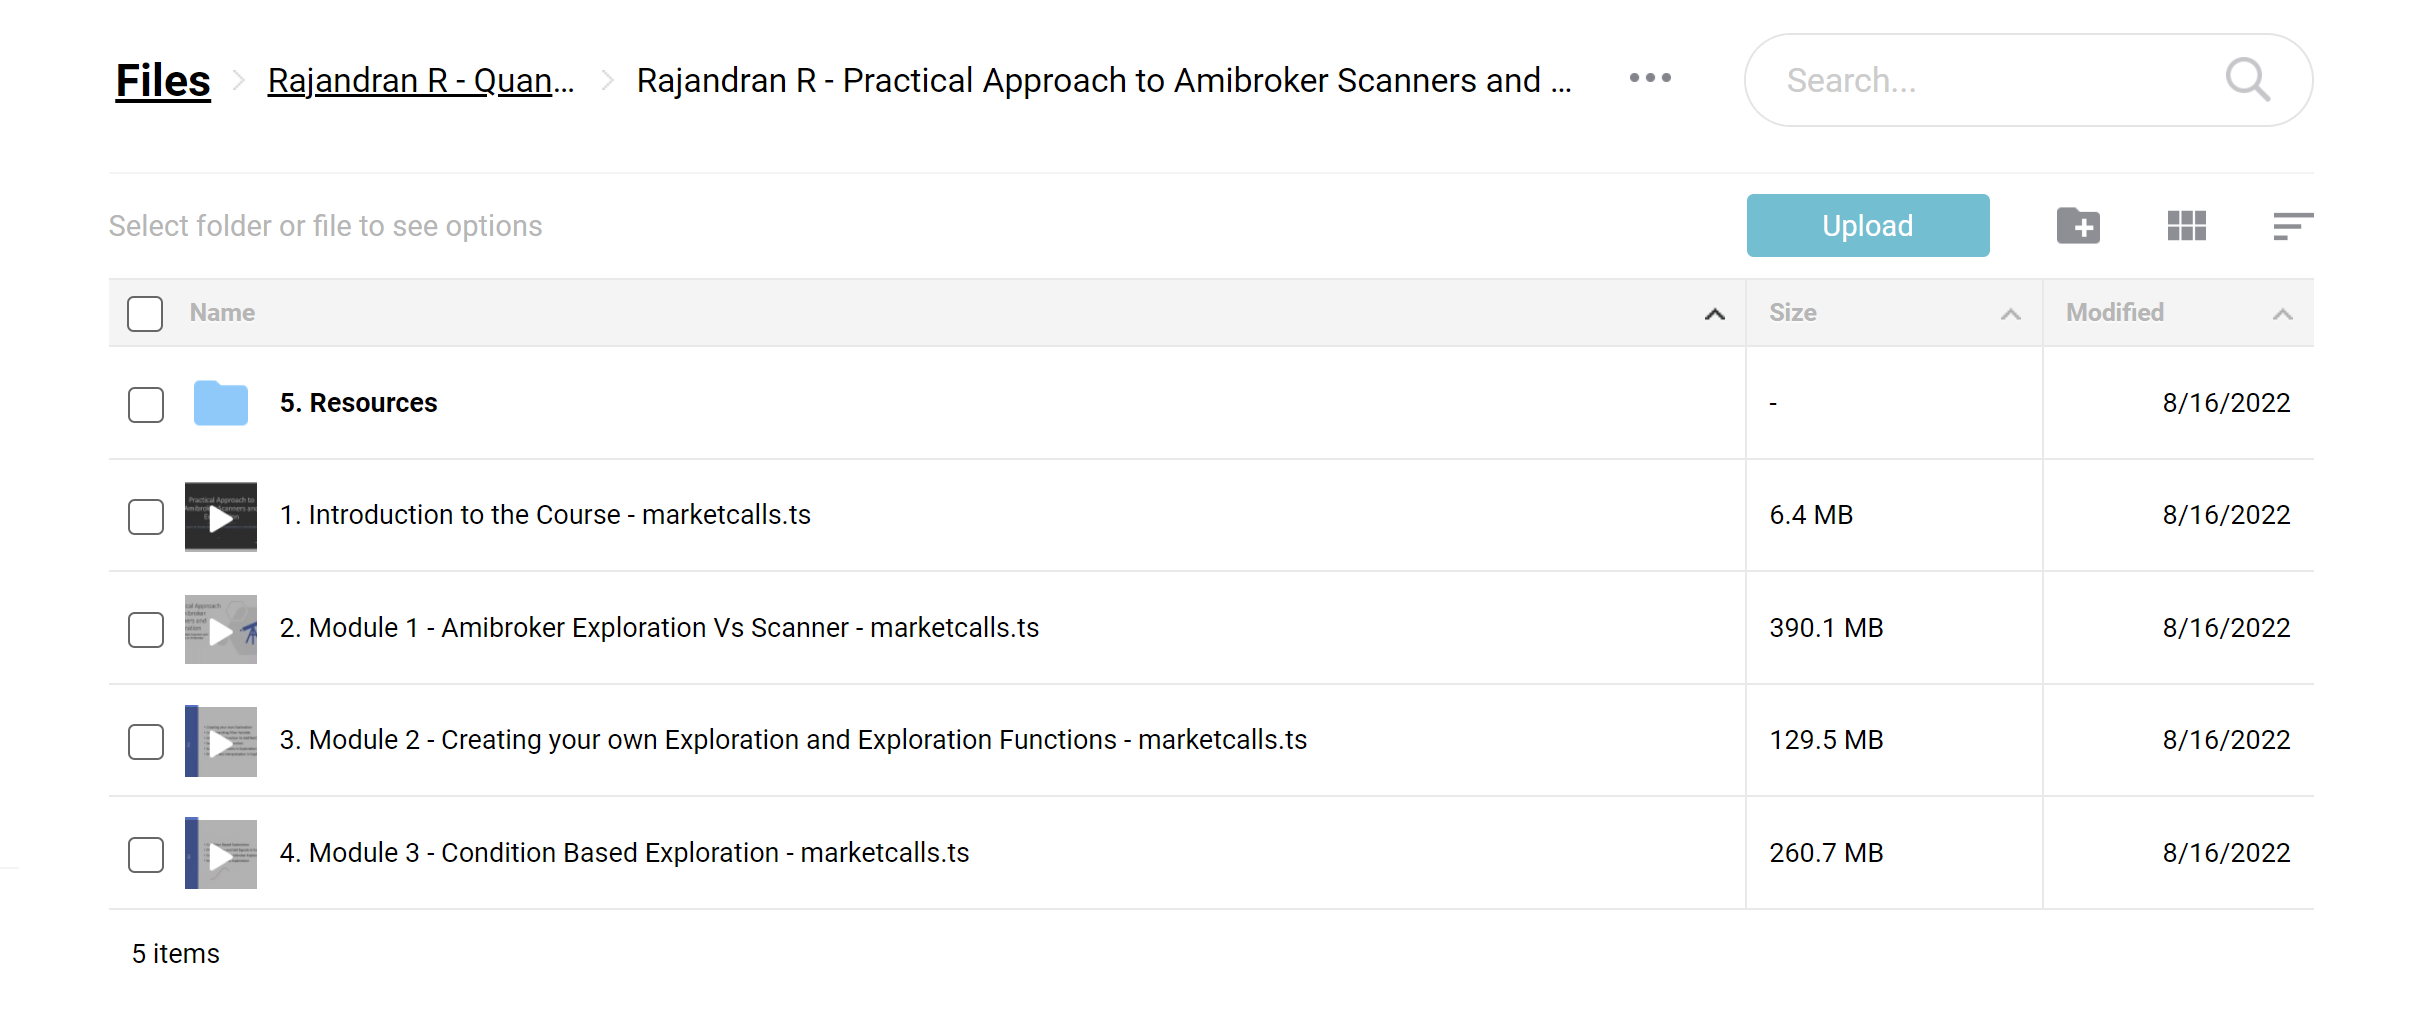 Rajandran R - Practical Approach To Amibroker Scanners And Exploration